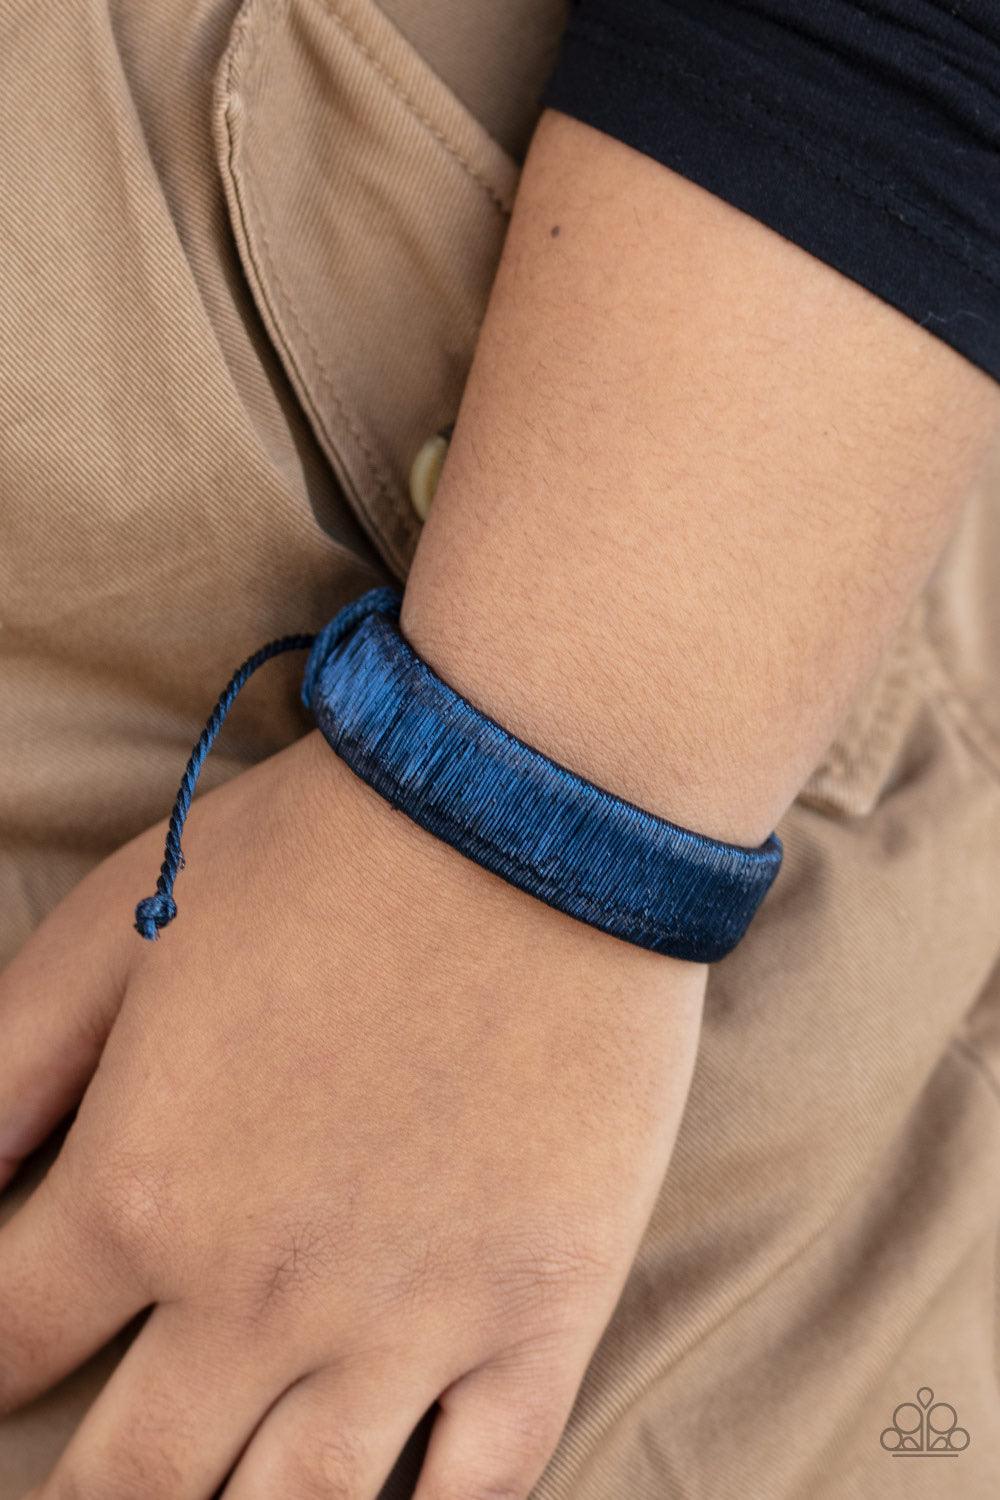 Paparazzi Accessories In A Flash - Blue Brushed in a metallic-like finish, shimmery blue wire wraps around a thick black leather band for an edgy look around the wrist. Features an adjustable sliding knot closure. Jewelry